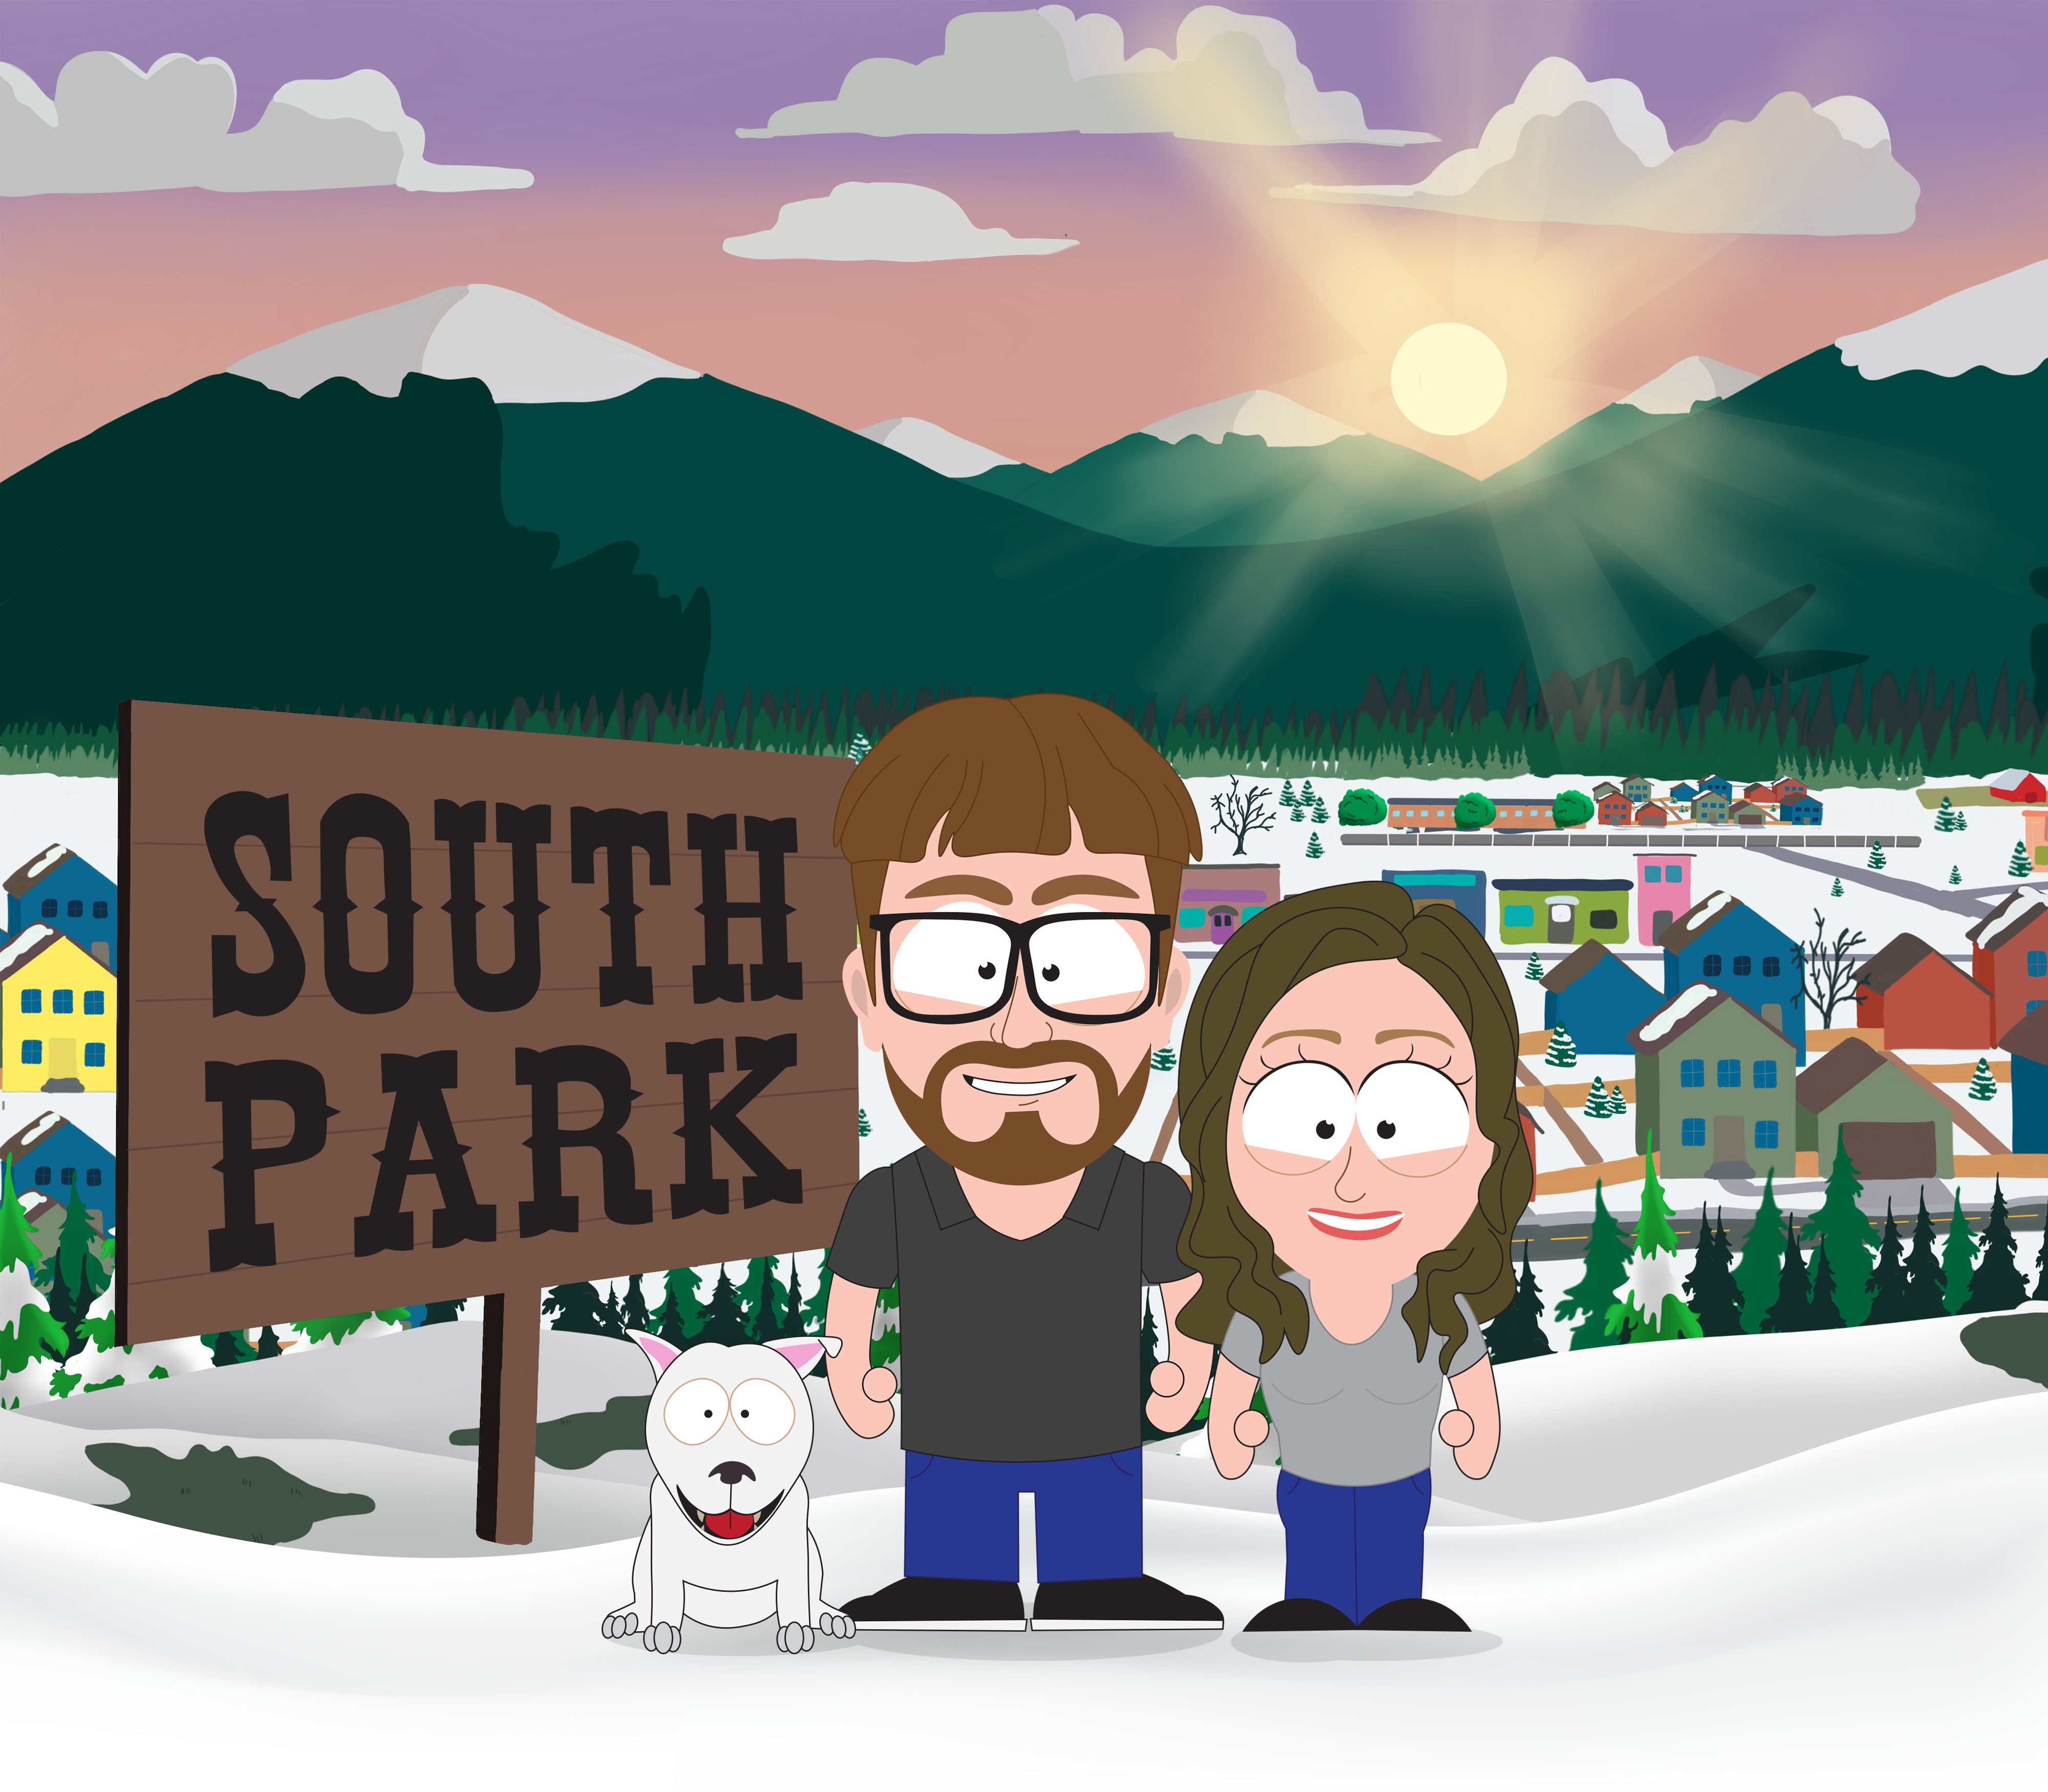 Come South to the Park